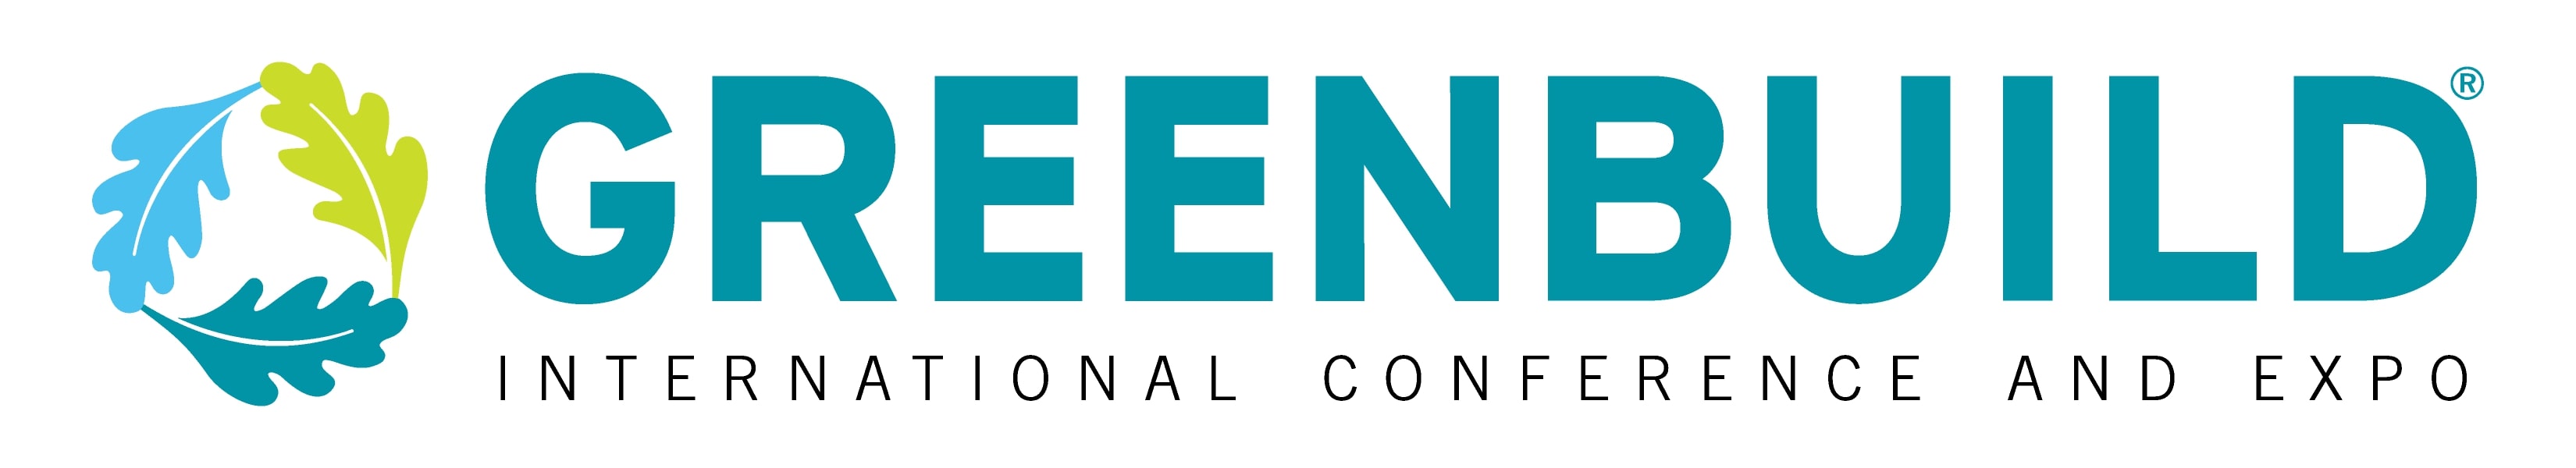 Greenbuild International Conference & Expo Innovation & Tech Today